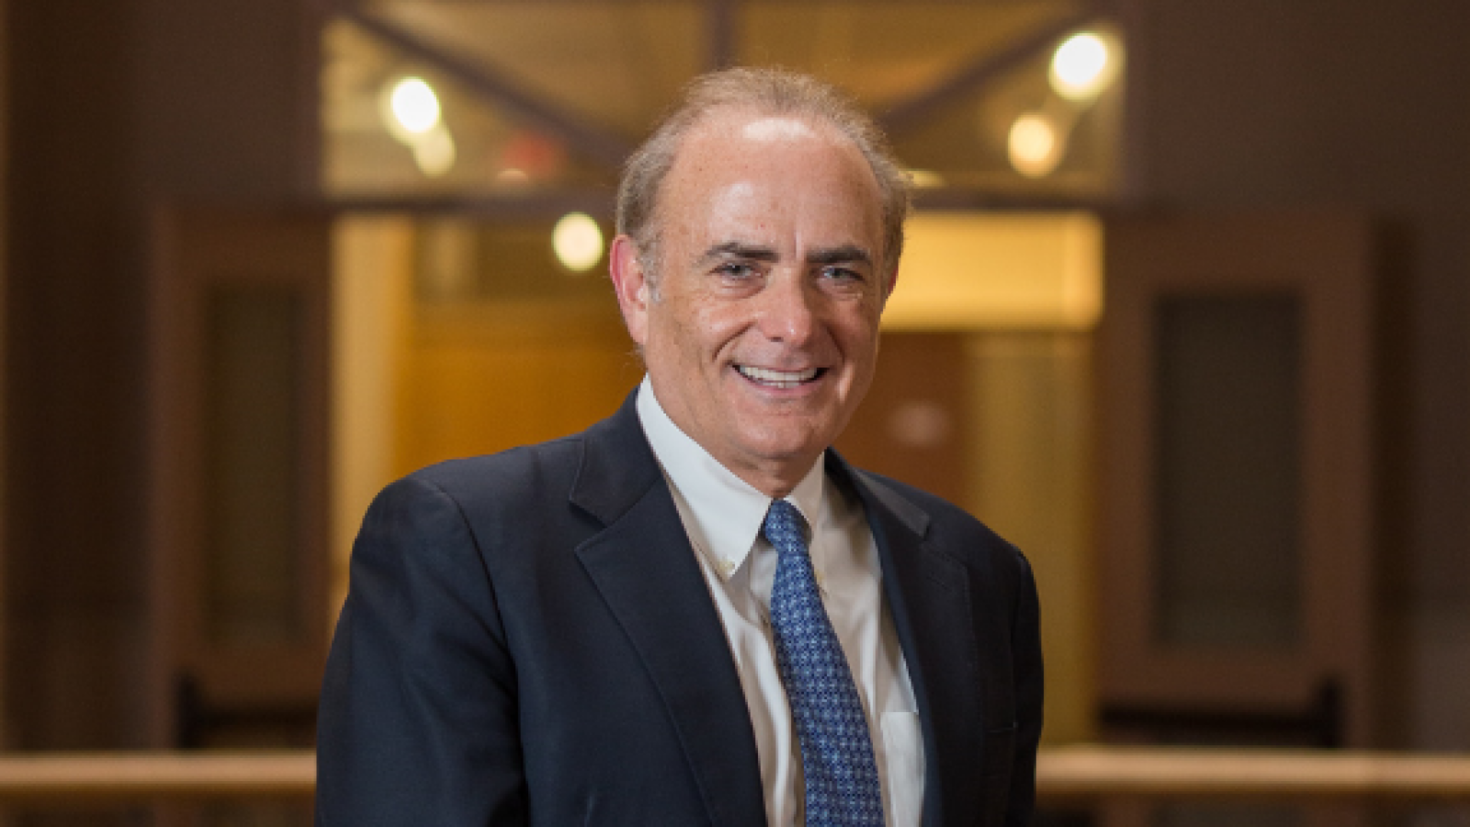 University Chancellor Calin Rovinescu, LLB ’80, retires from Air Canada